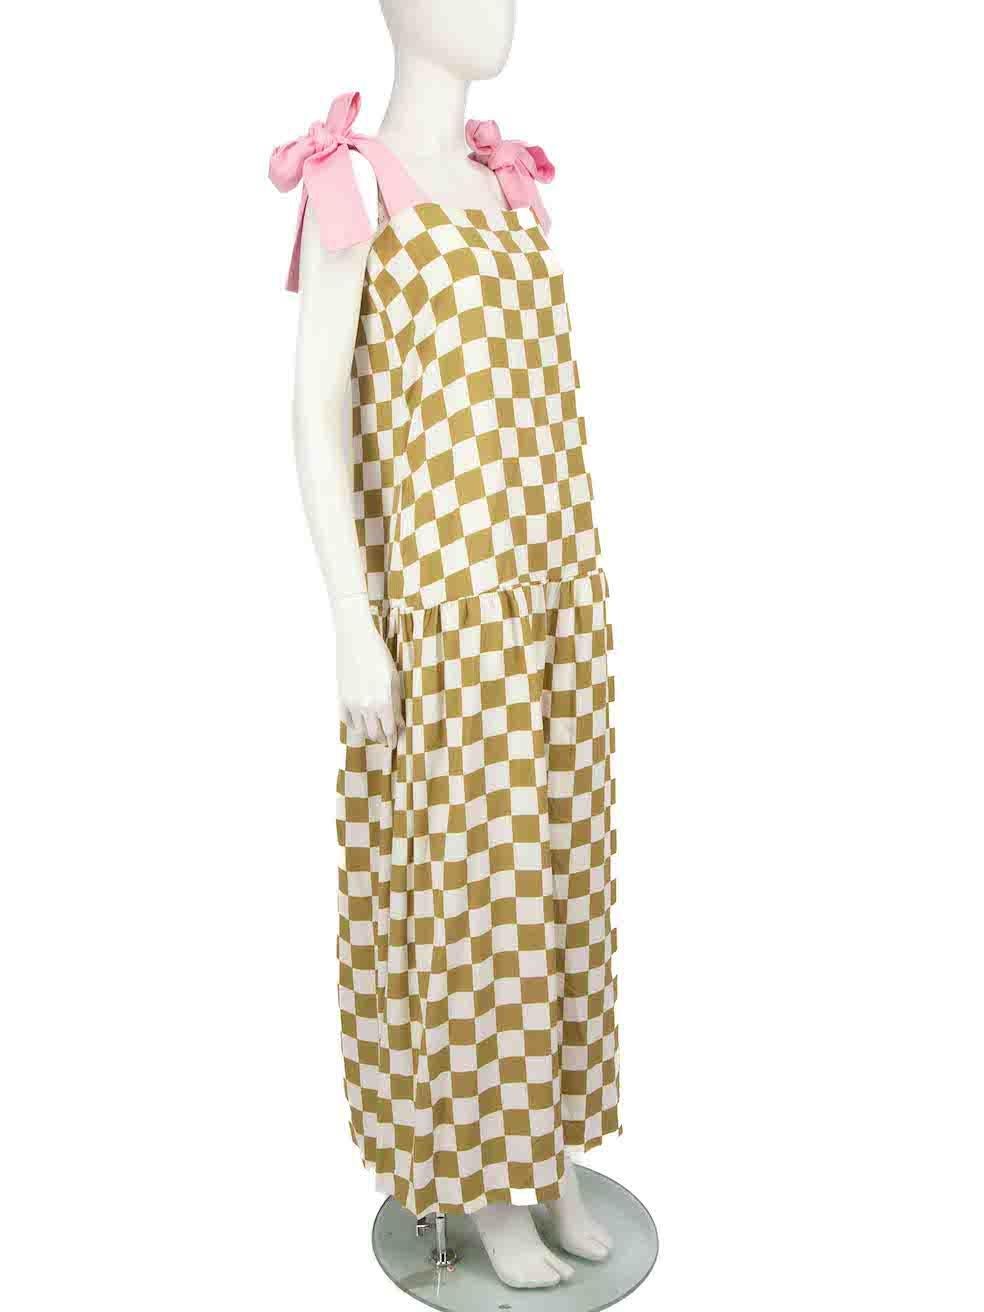 CONDITION is Never worn, with tags. No visible wear to dress is evident on this new Adriana Degreas designer resale item.
 
 
 
 Details
 
 
 Multicolour- green, white, pink
 
 Modal
 
 Dress
 
 Checkered pattern
 
 Maxi
 
 Sleeveless
 
 Tied